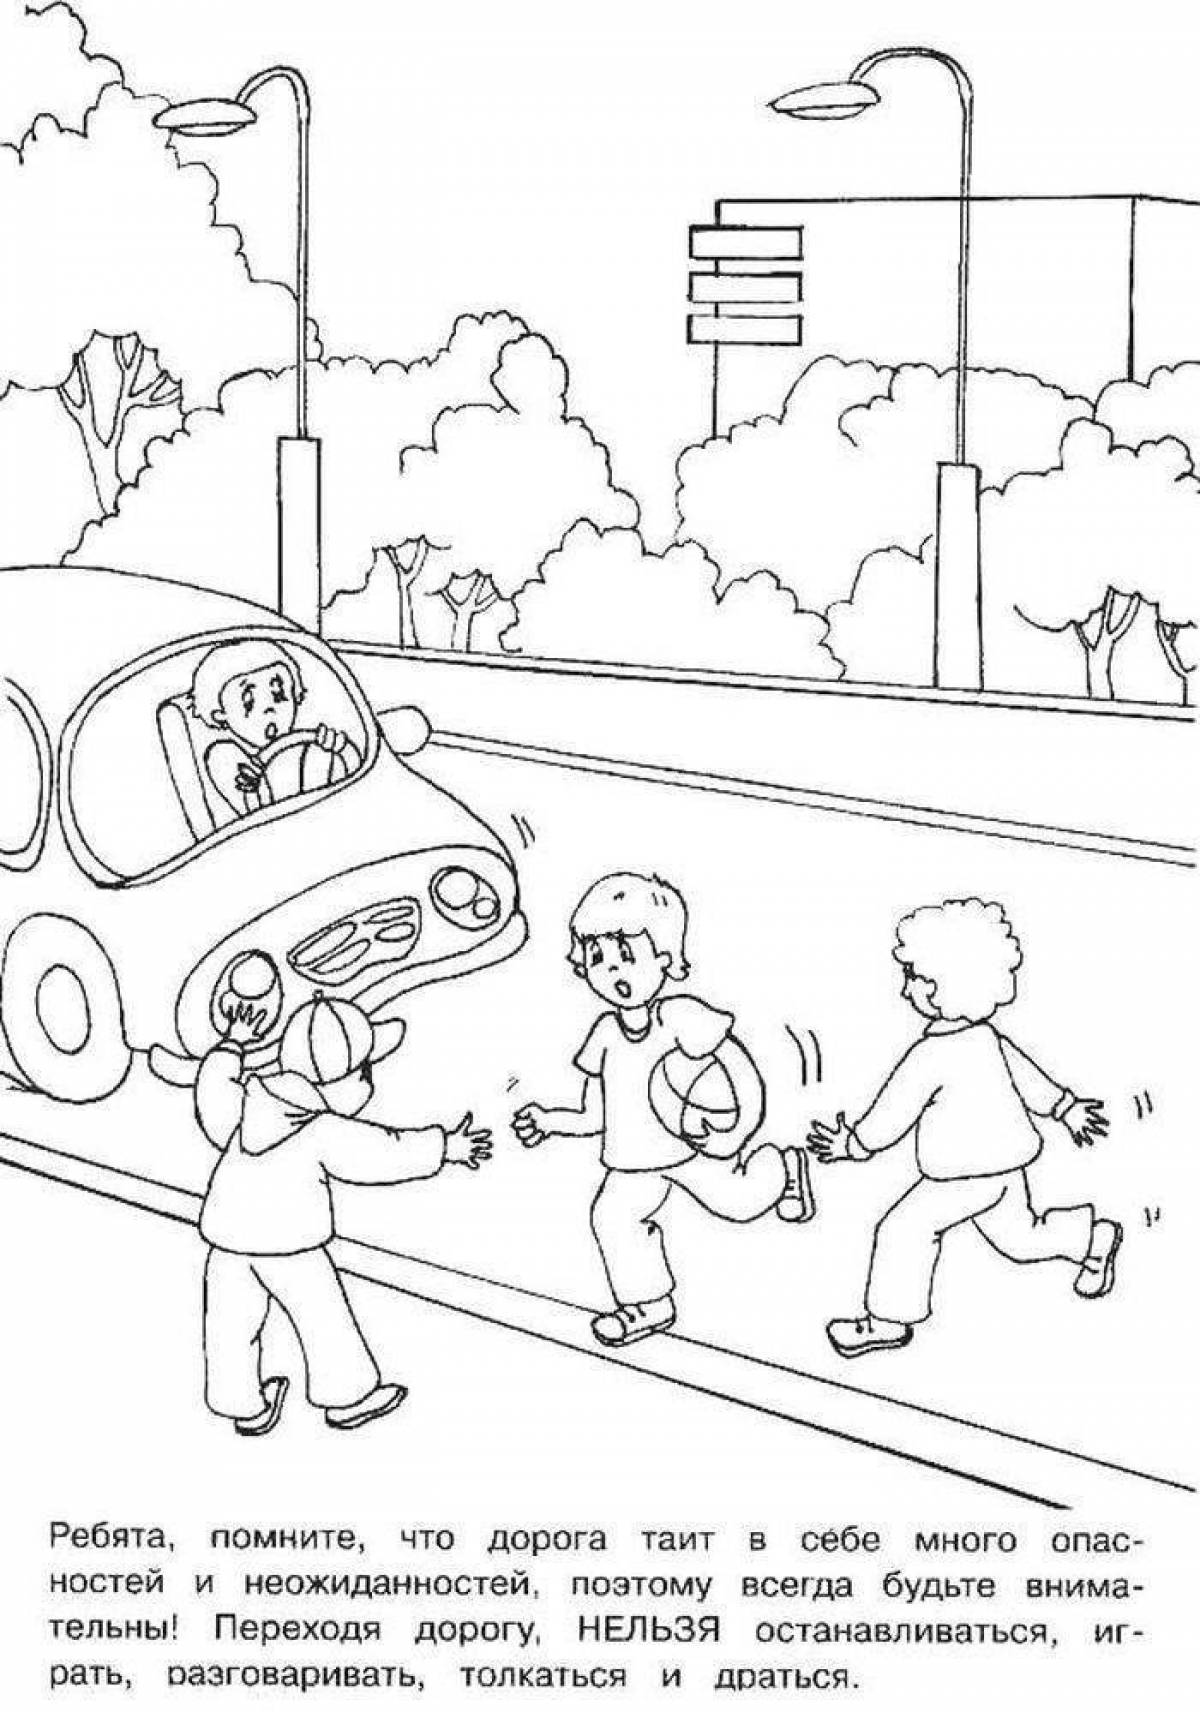 Coloring page inspiring road safety